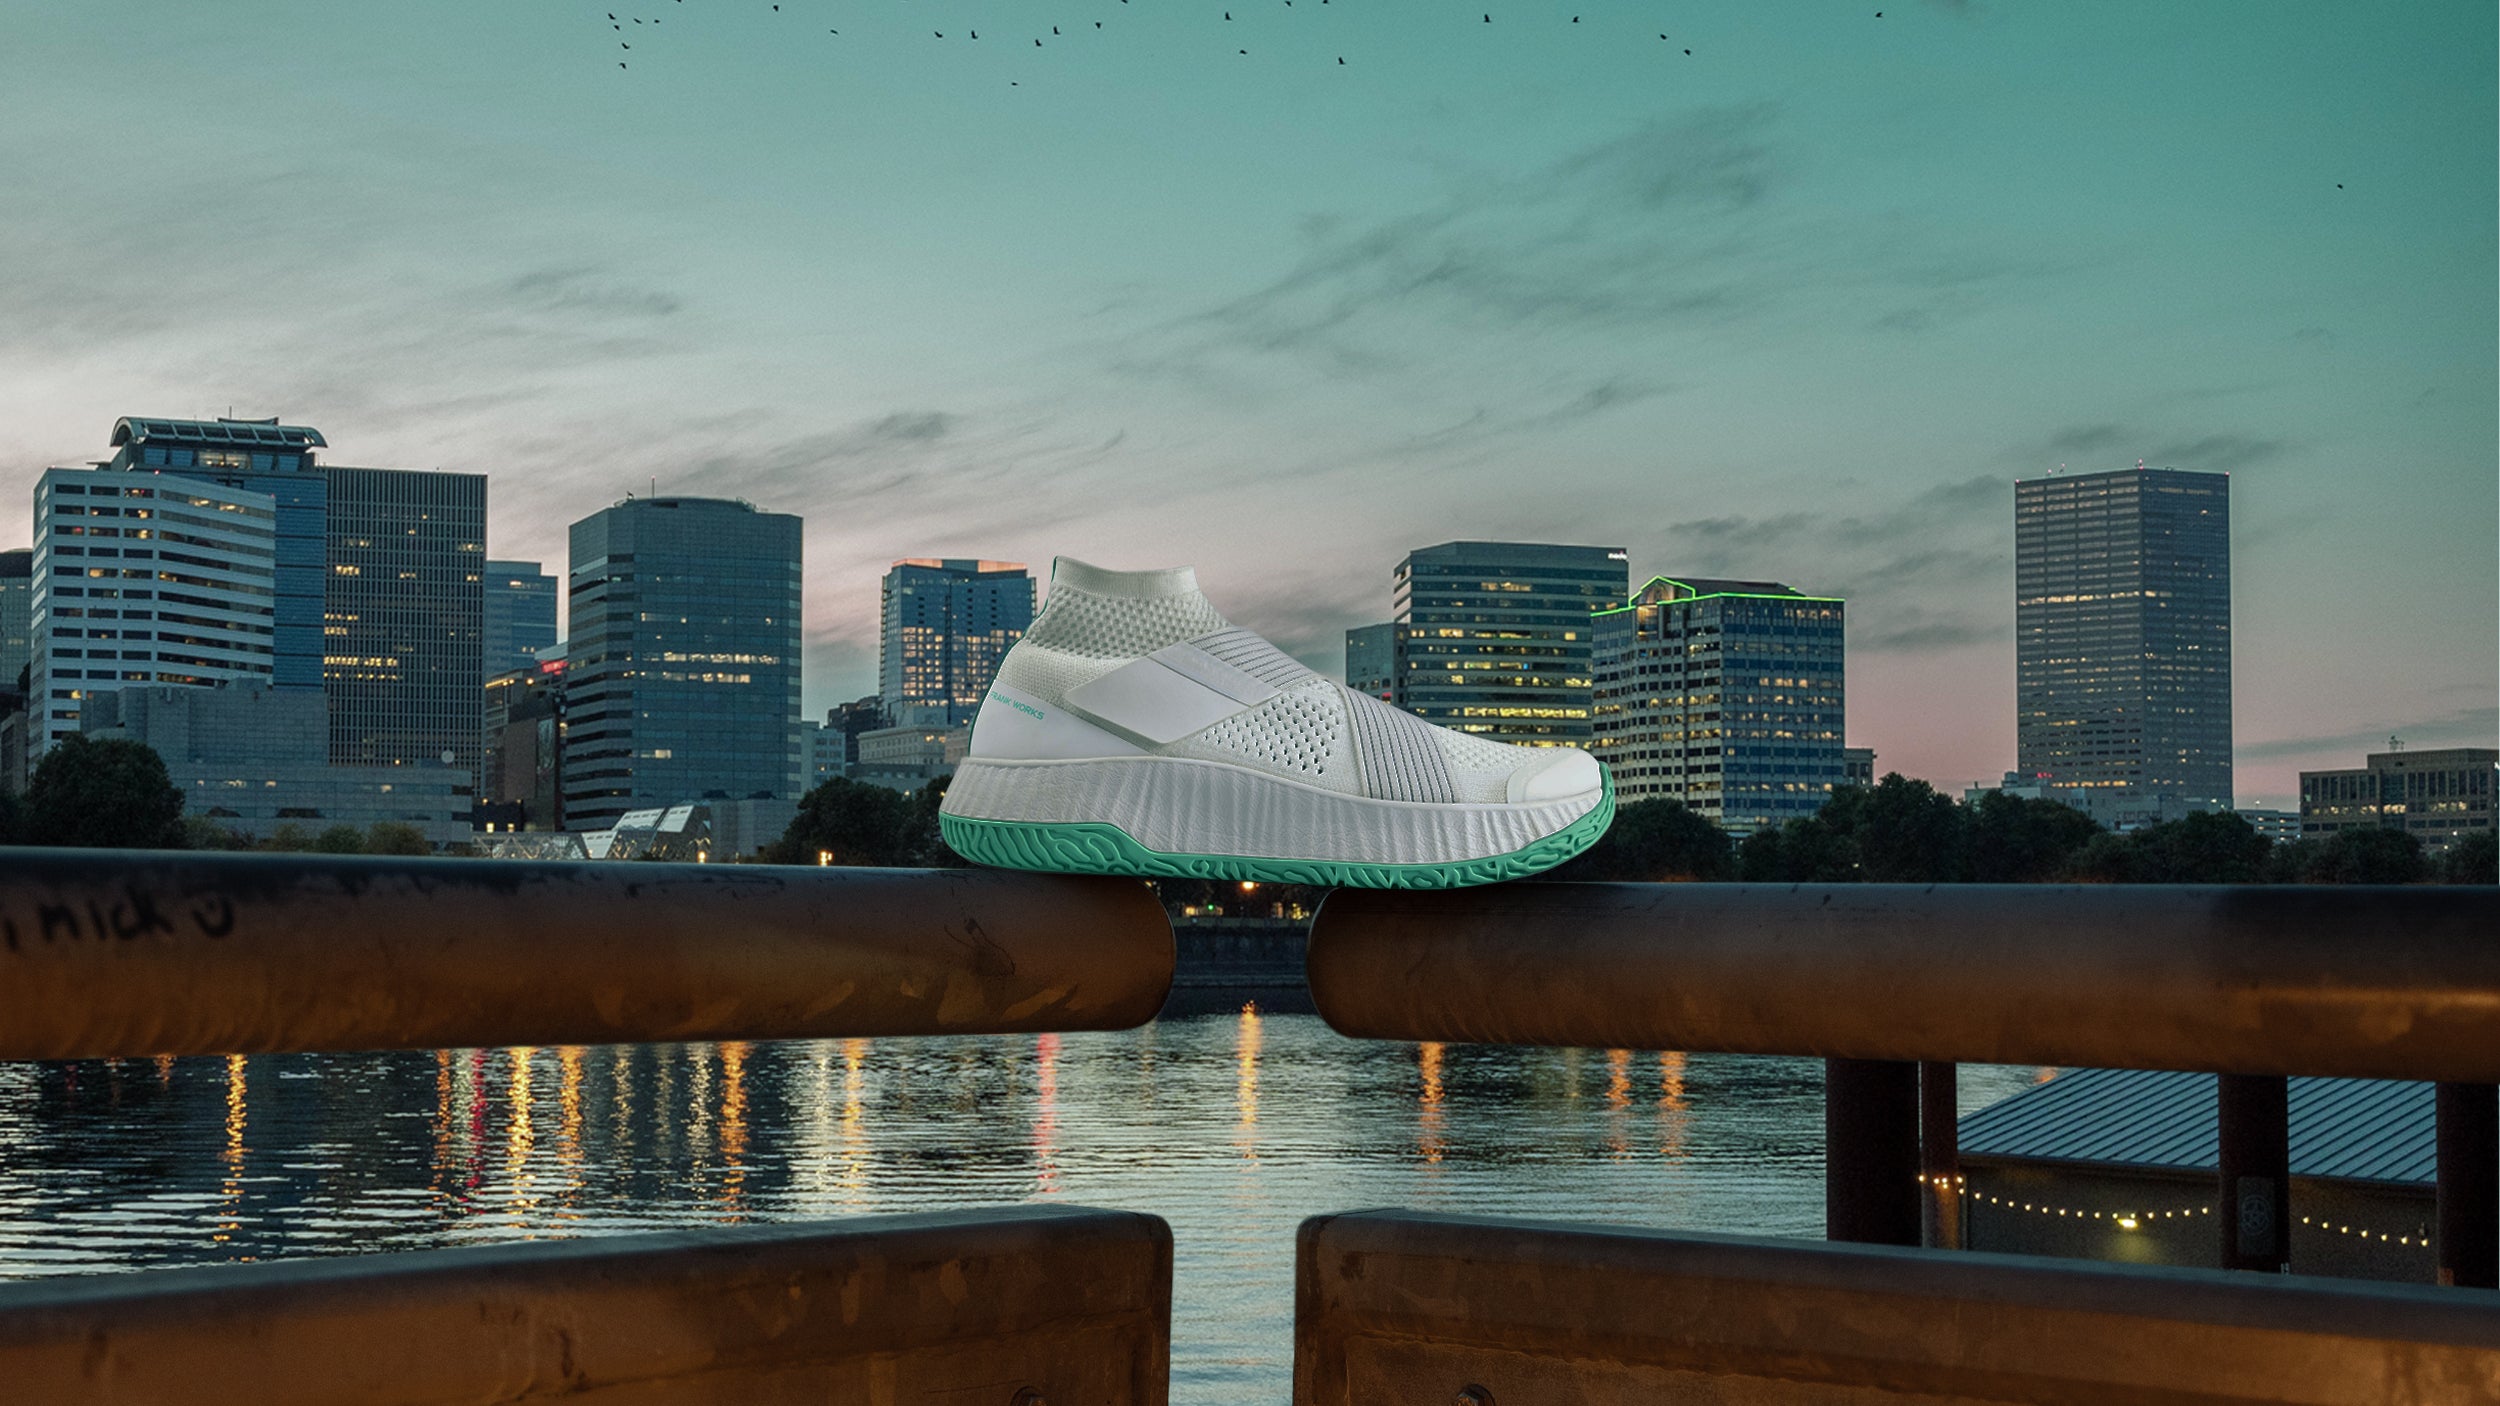 The right shoe of the white/white colorway of The One resting on a handrail with the Portland skyline in the background.